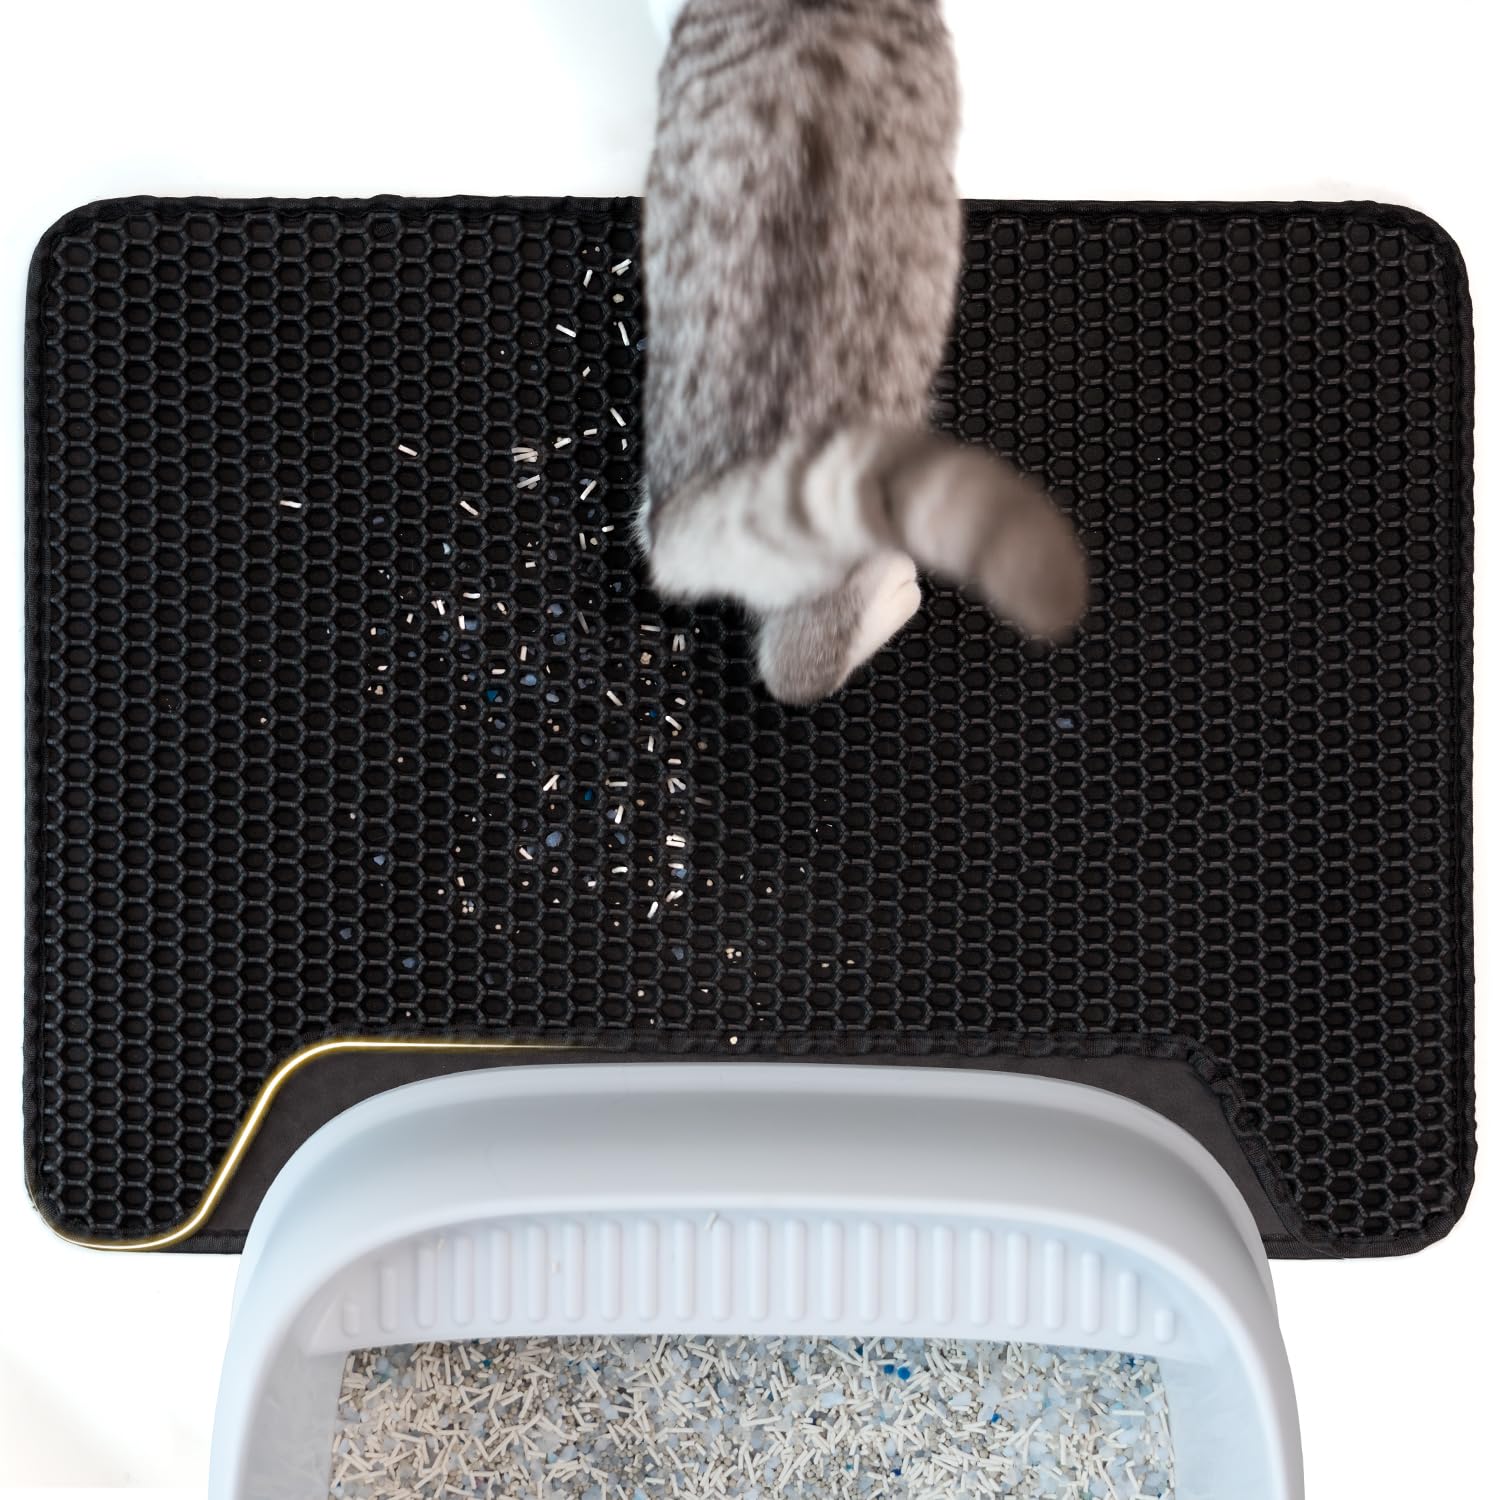 2 Pack Foldable Cat Litter Trapper (27 by 27) Mat Connects with